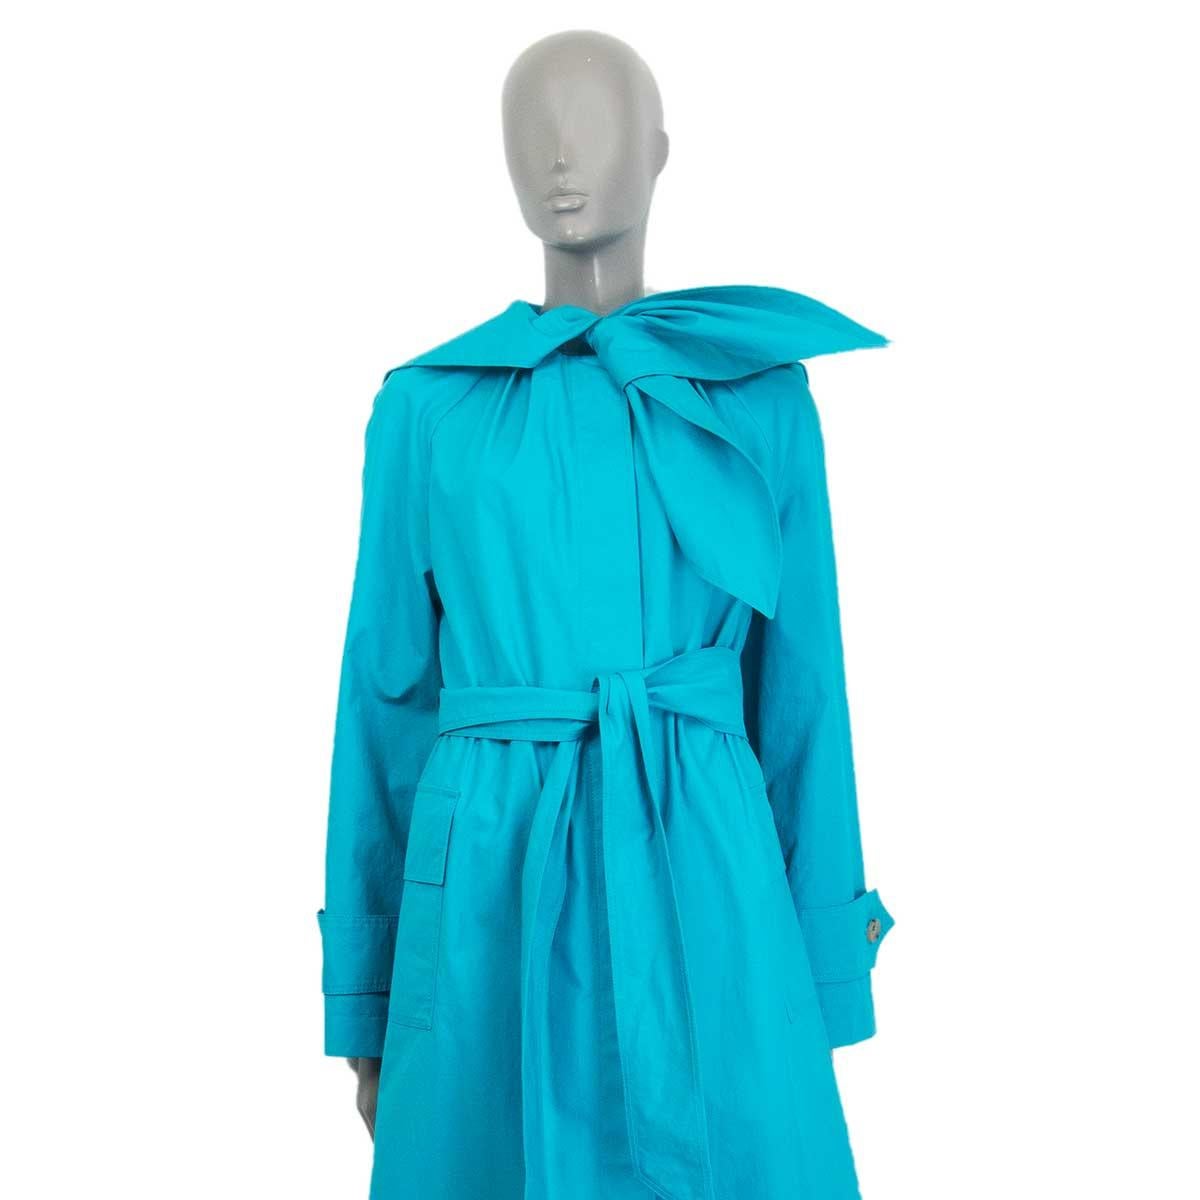 100% authentic Lanvin oversized trench coat in teal coated cotton (100%) featuring 6 hidden beige horn buttons and raglan sleeves. Features a bow detail around the neck, flap-pockets on the side, waist-belt and drawstring on the inside. Unlined. Has